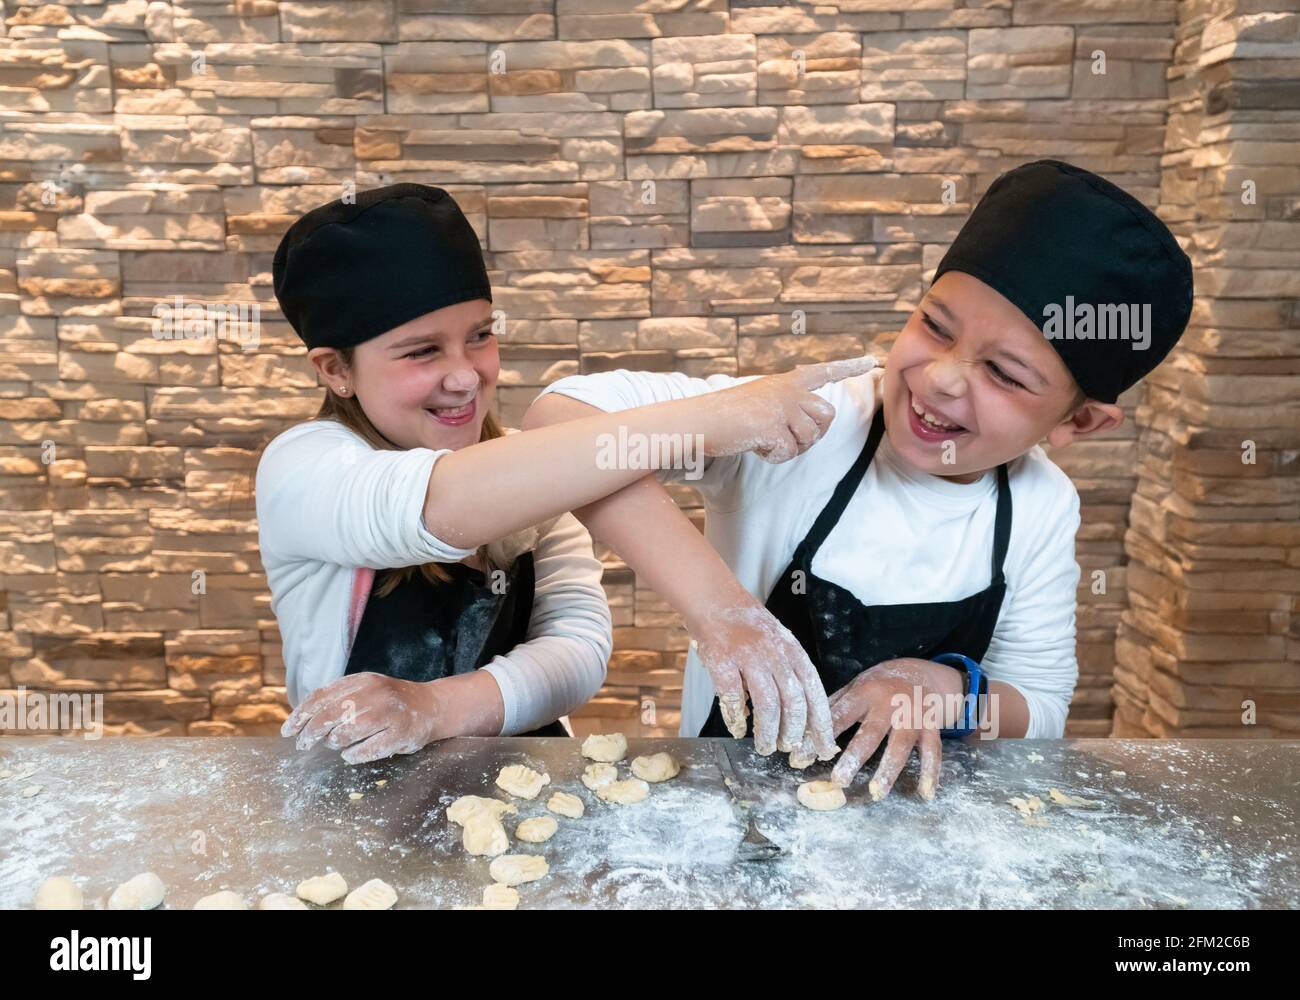 Smiling Kids In Cook's Uniform Making Bakery Dough With Flour And Eggs In  The Kitchen Stock Photo, Picture and Royalty Free Image. Image 60681329.